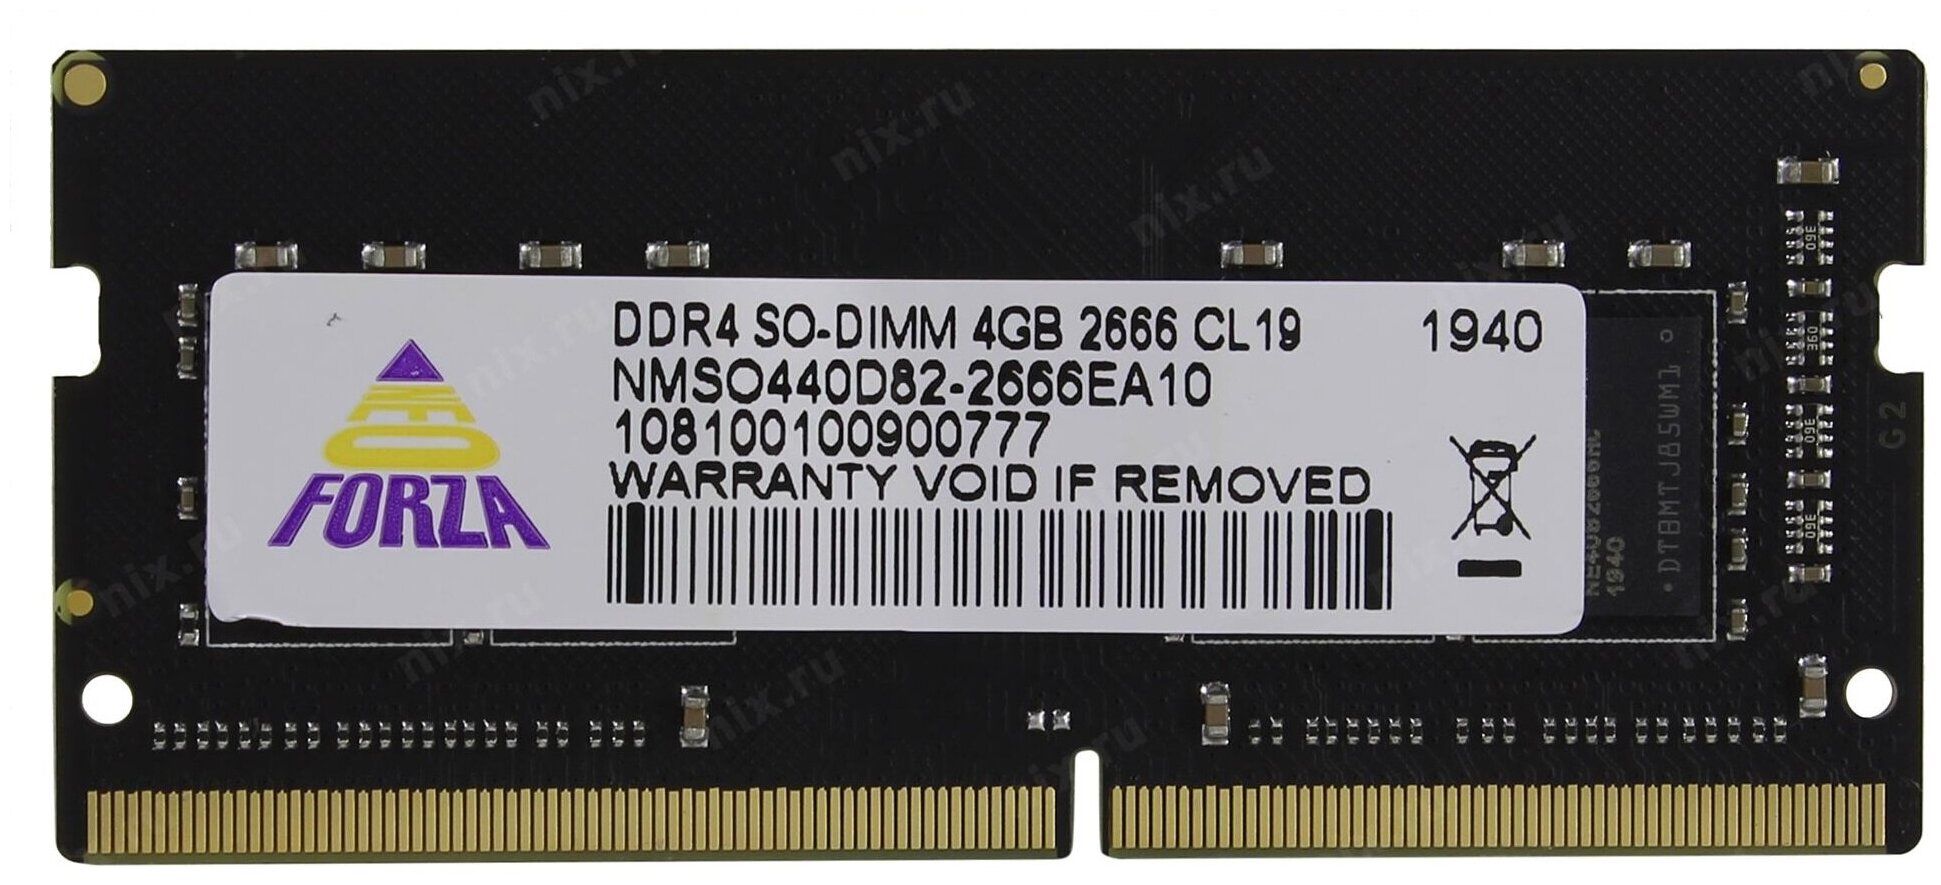 Neo Forza Sodimm DDR4 4Gb PC21300 2666MHz CL19 (nmso440d82-2666ea10) .